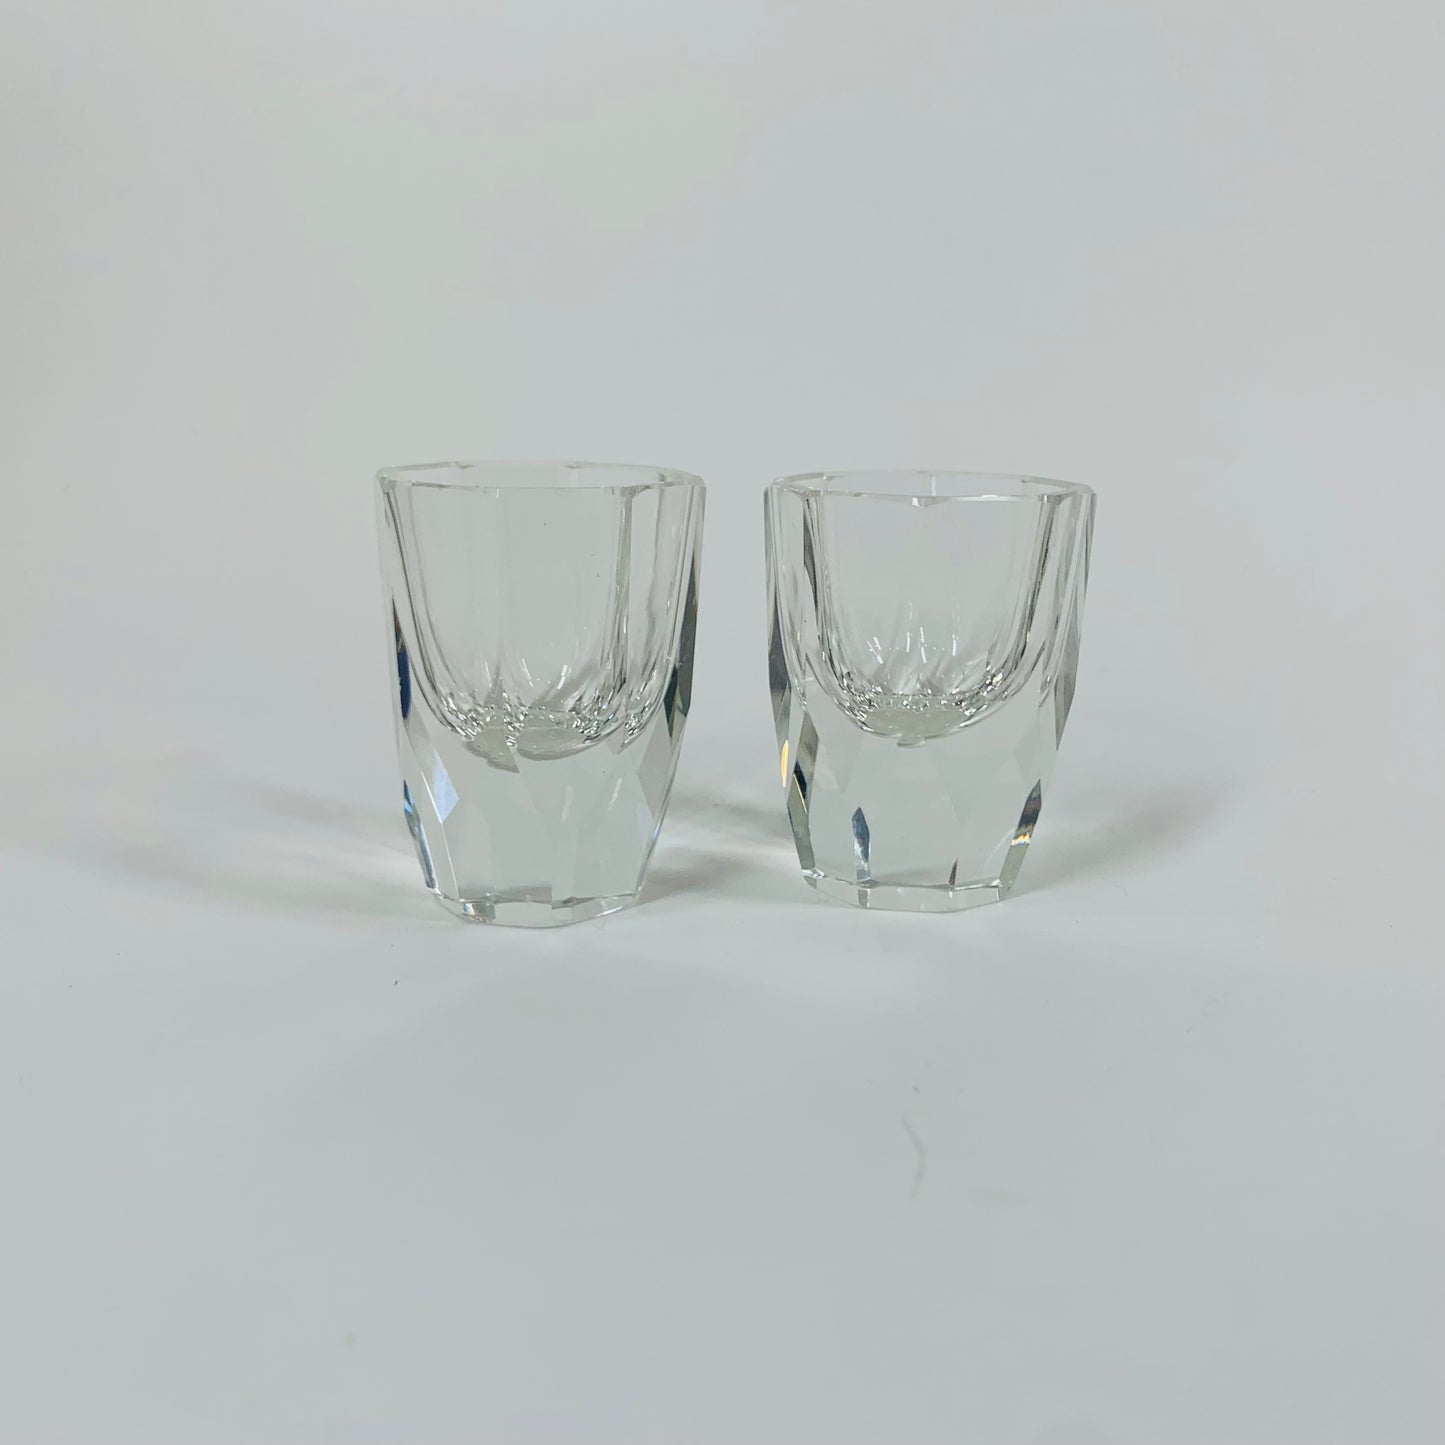 Extremely rare antique Art Deco hand cut Moser crystal shot glasses